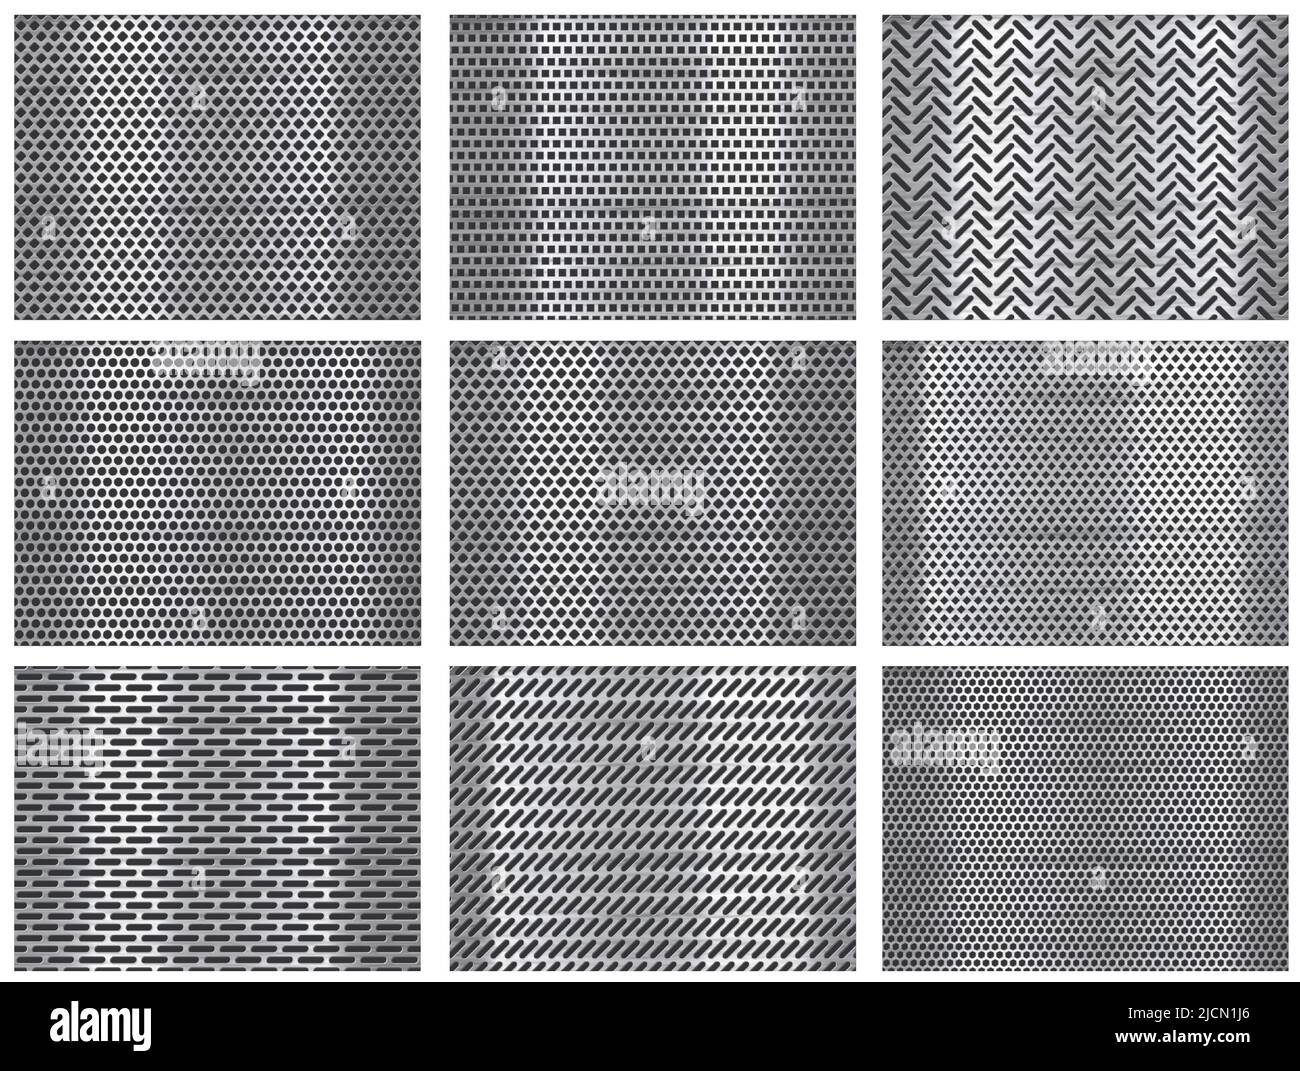 Perforated steel. Grill texture, stainless steel plate with perforation holes and metallic grid background vector set Stock Vector